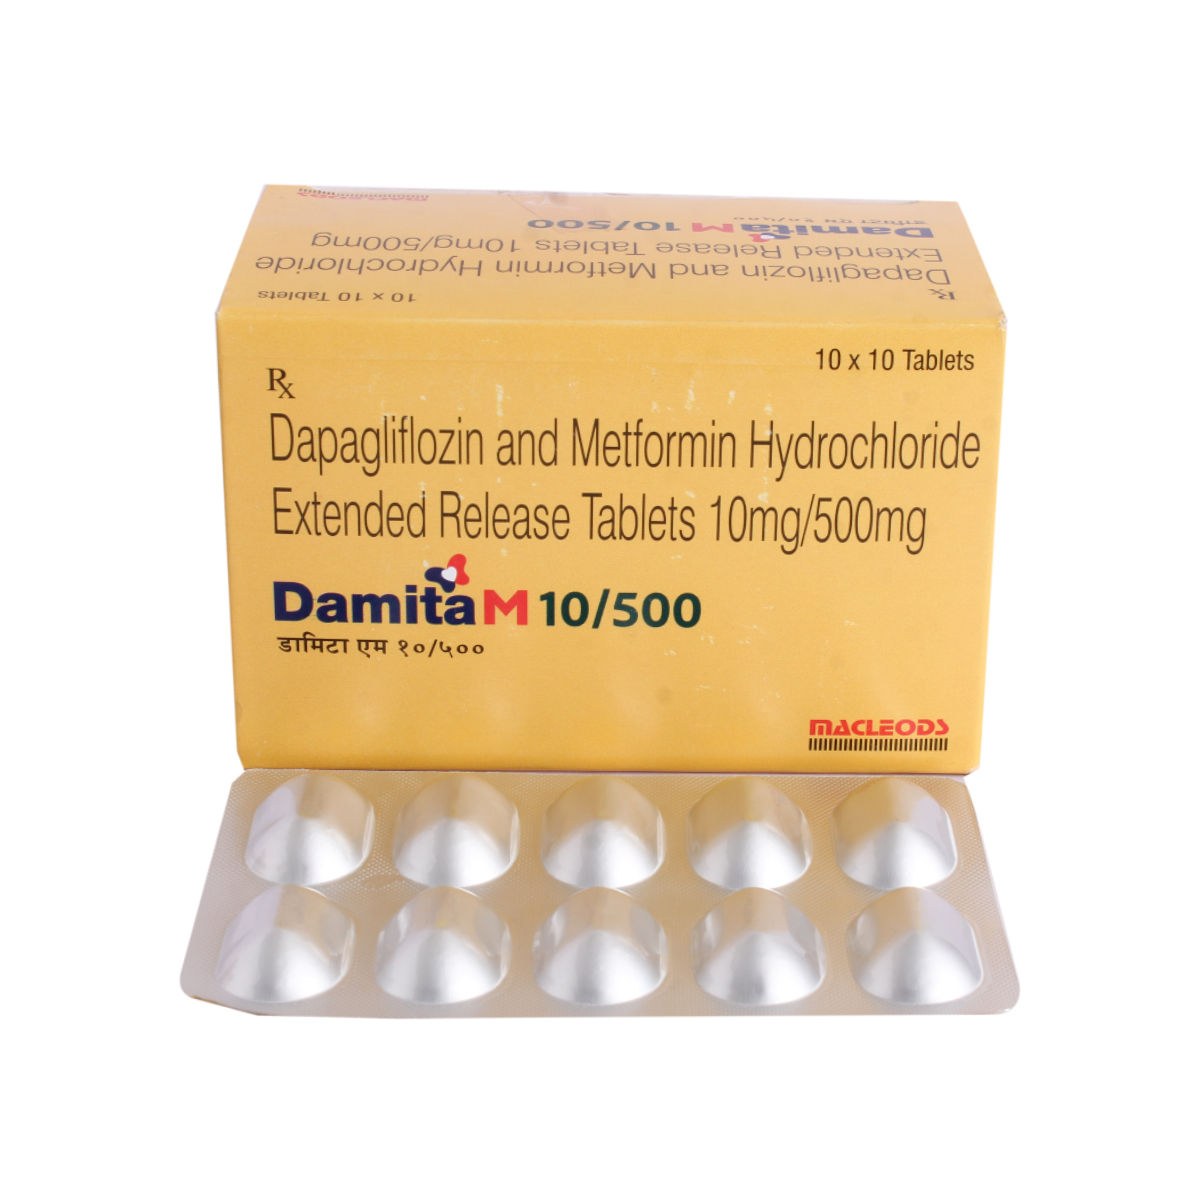 Damita M 10/500 Tablet 10's Price, Uses, Side Effects, Composition ...